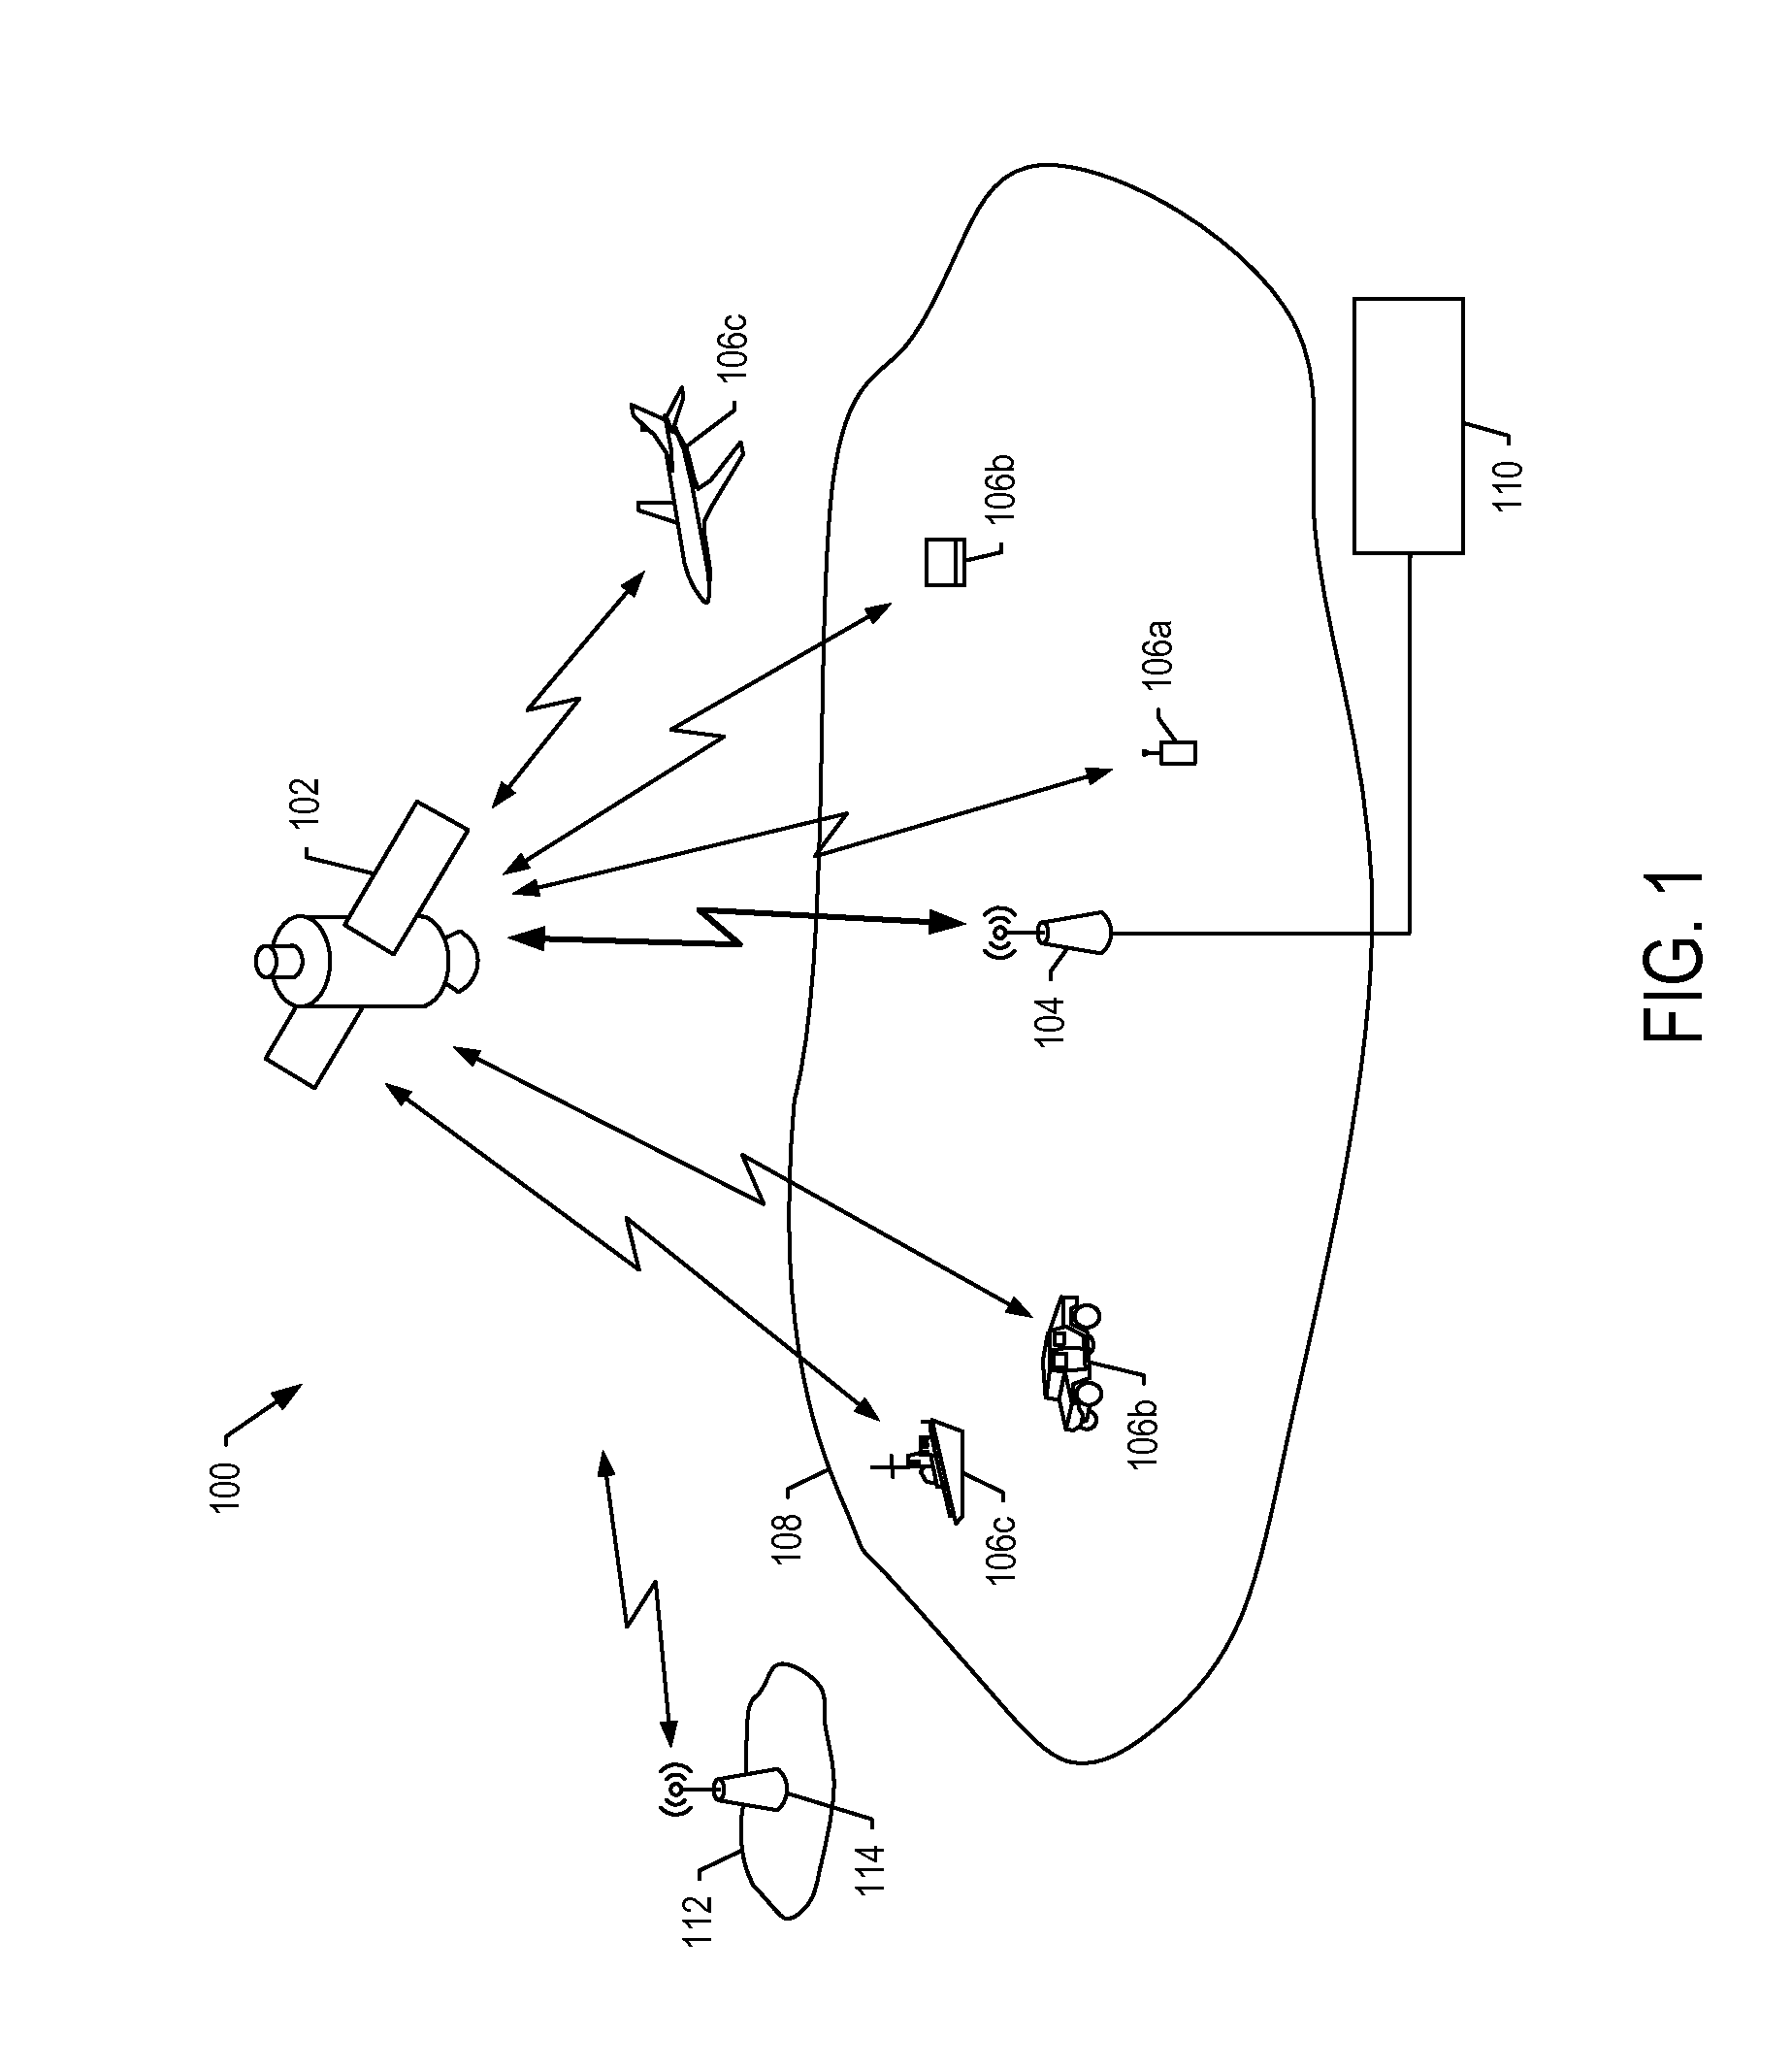 Interference suppression in a satellite communication system using onboard beamforming and ground-based processing